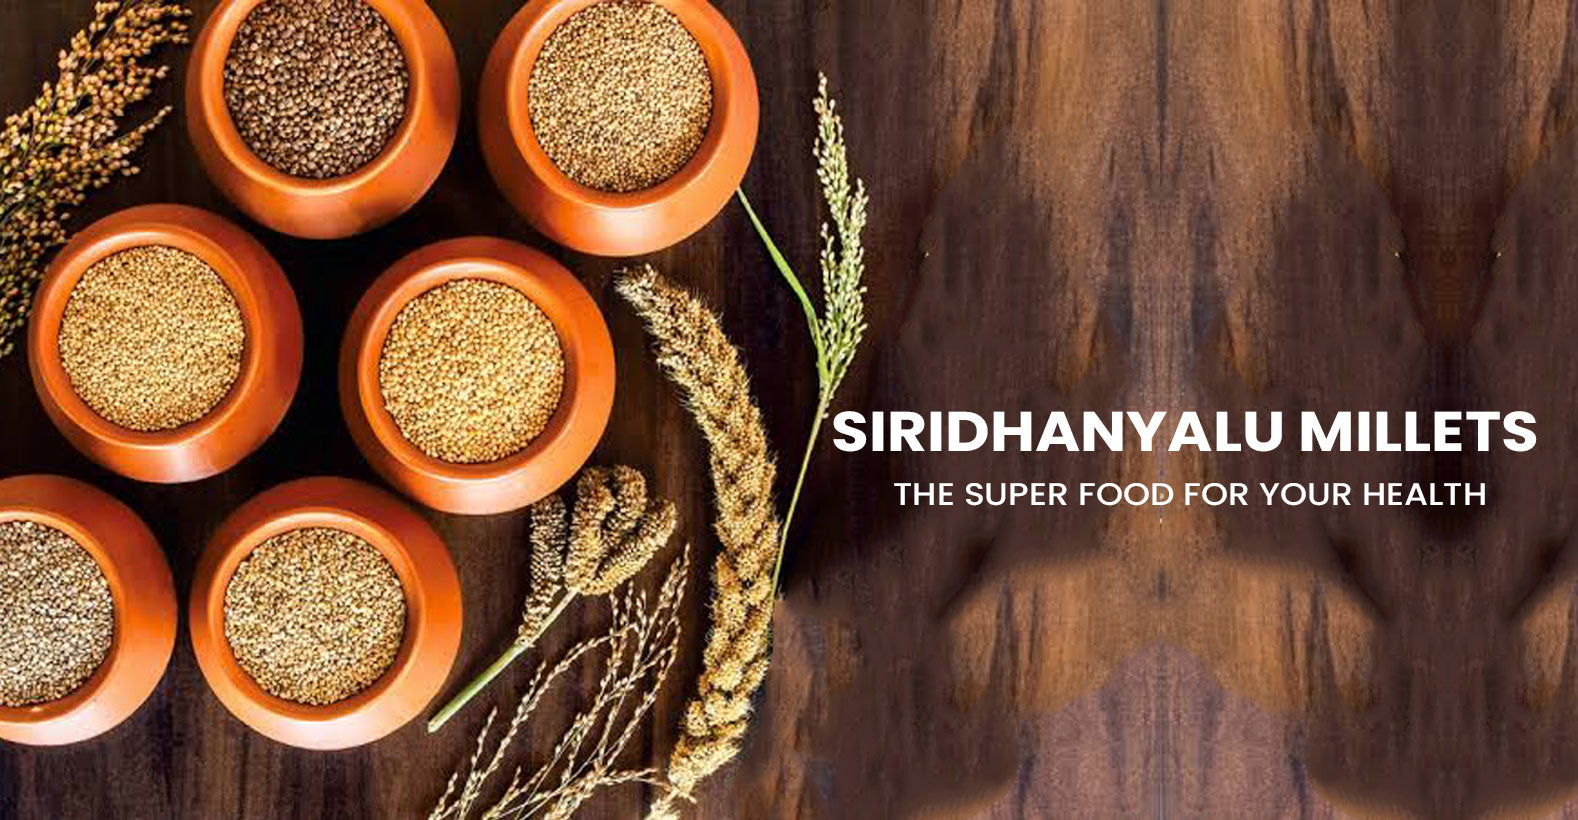 Siridhanyalu Millets – The Super Food For Your Health